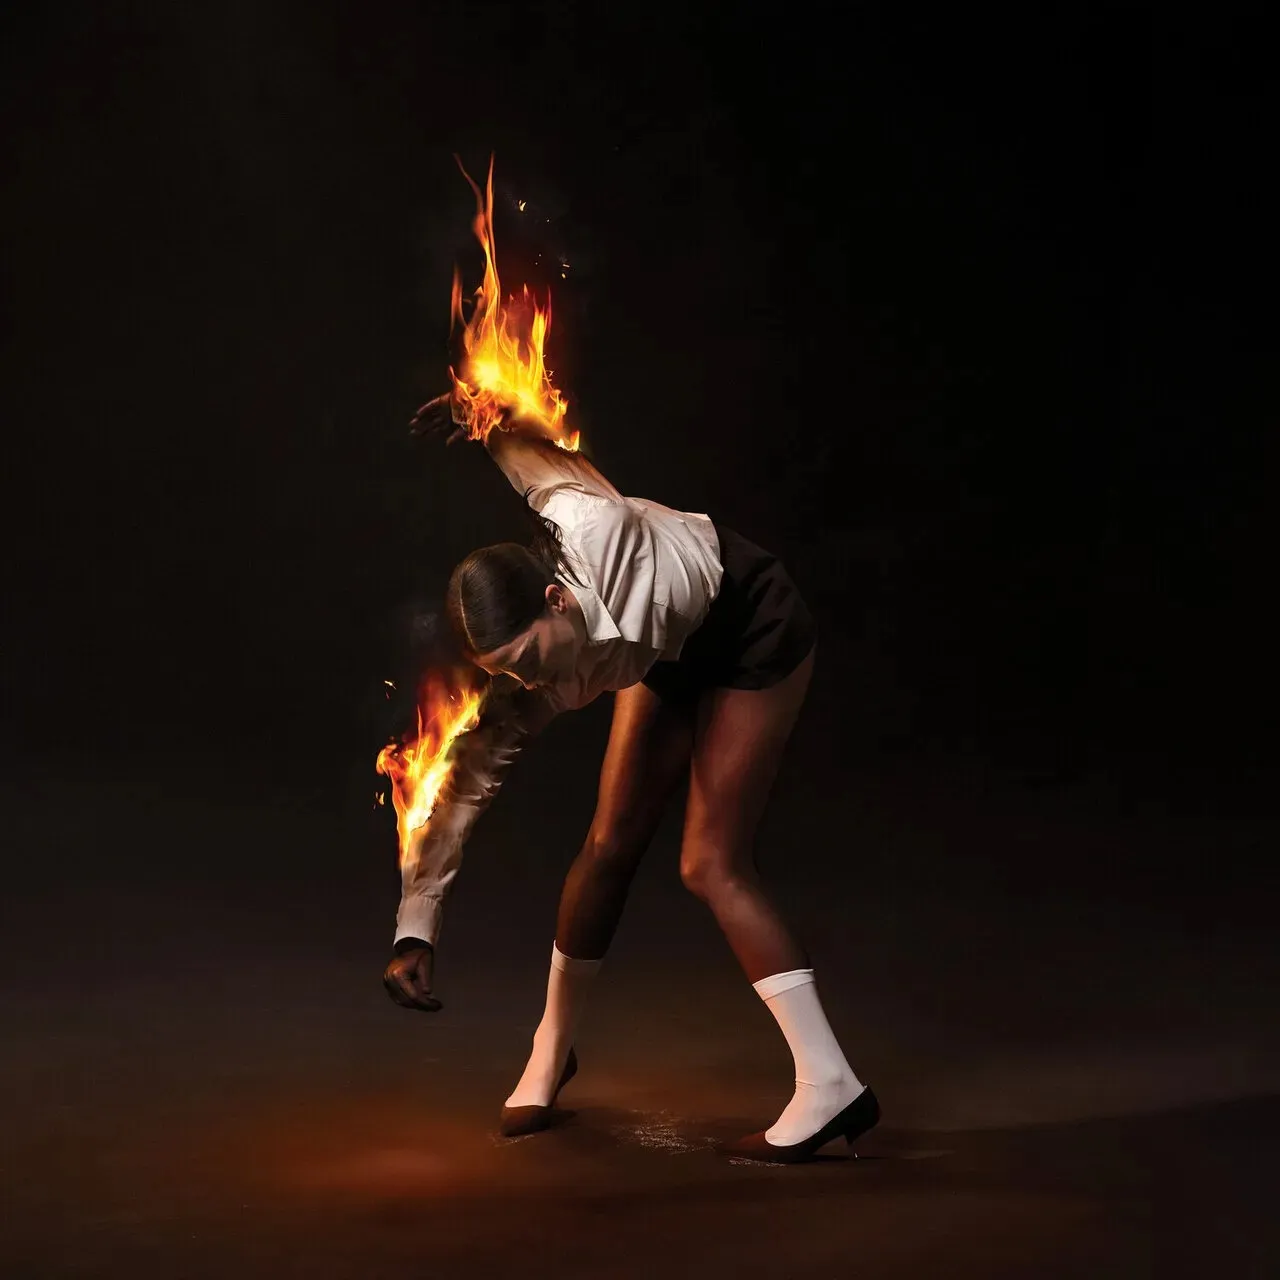 Album cover with a woman on fire.